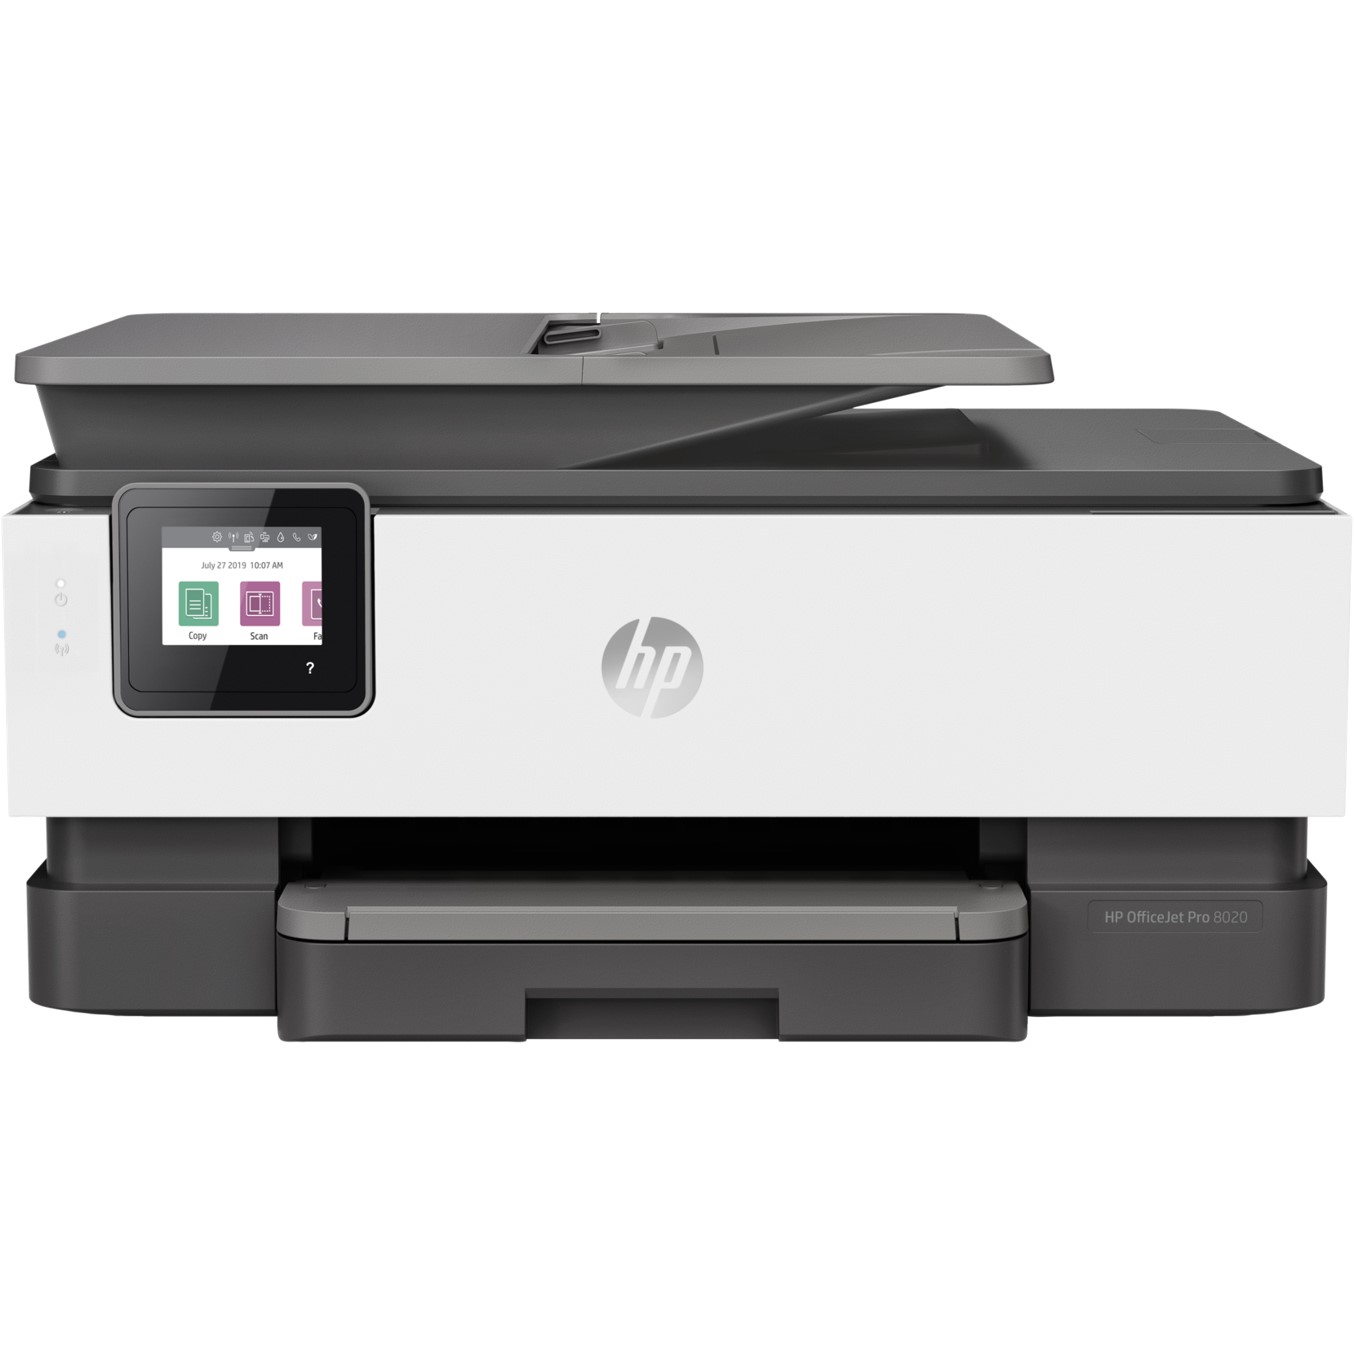 Multifuncion hp inyeccion color officejet pro 8022 fax -  a4 -  29ppm -  red -  wifi -  duplex impresion -  adf